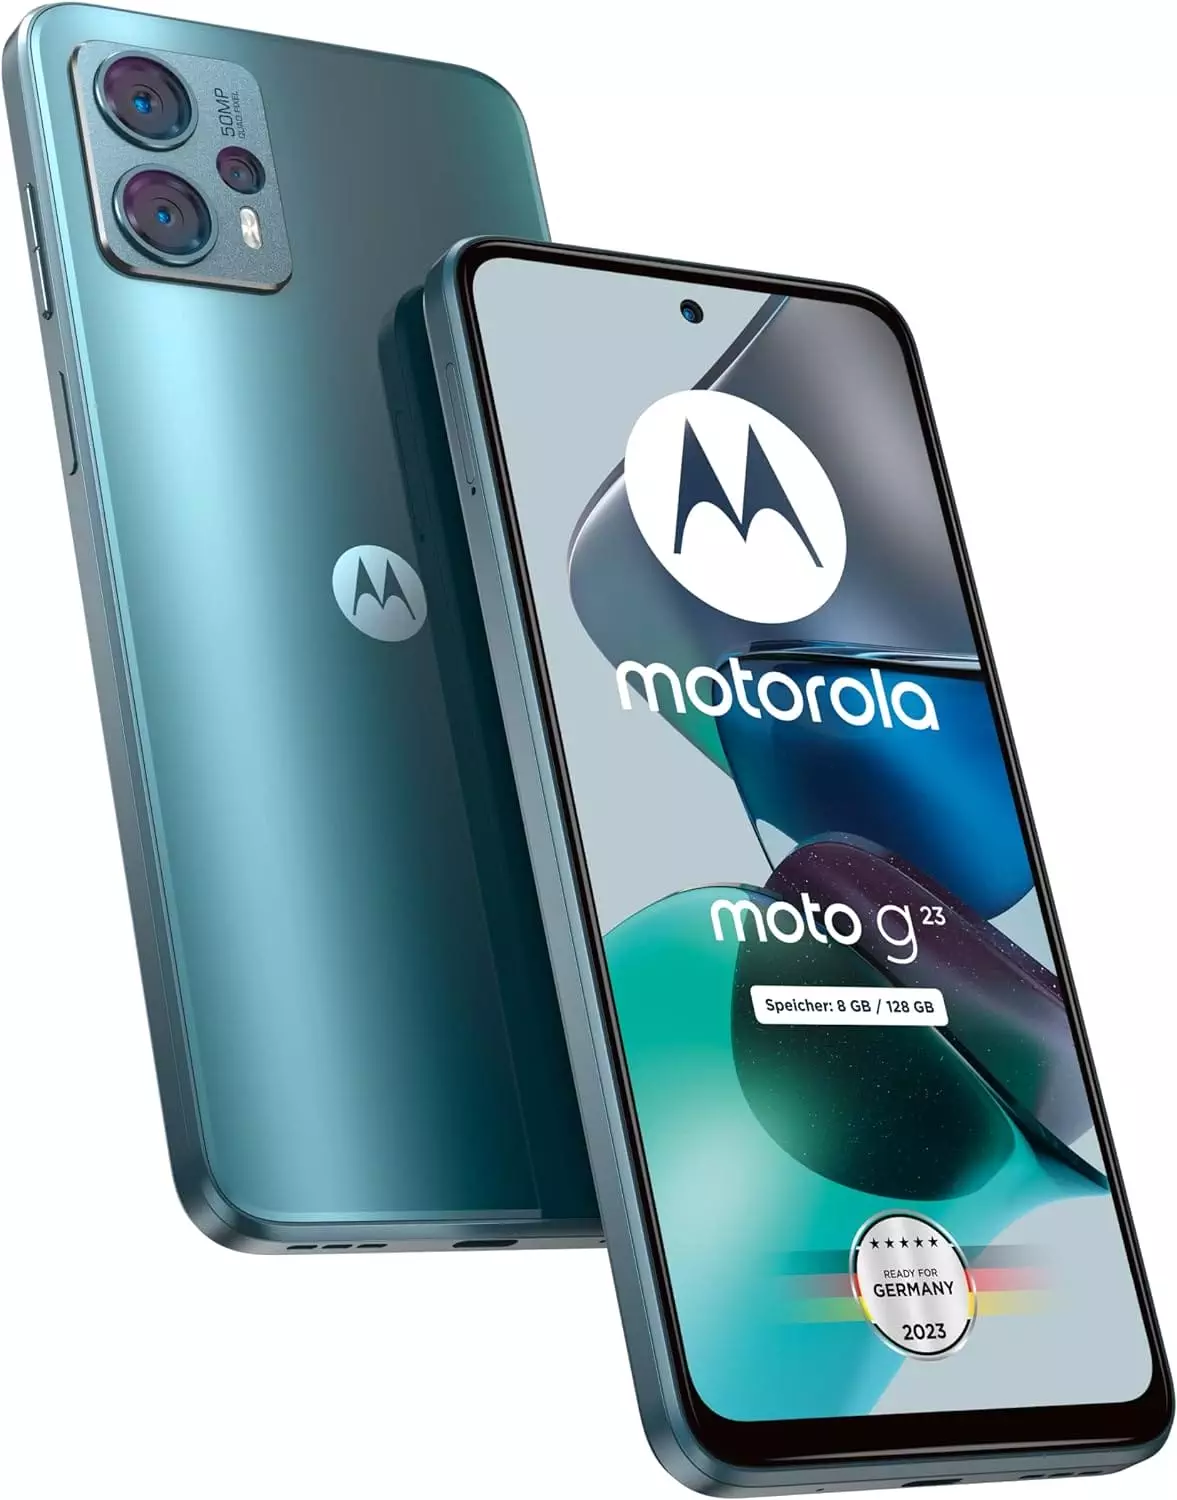 Motorola Moto g23 Smartphone (6.53 Inch HD+ Display, 50 MP Camera, 8/128 GB, 5000 mAh, Anroid 13) Steel Blue with Protective Cover [Exclusive to Amazon]